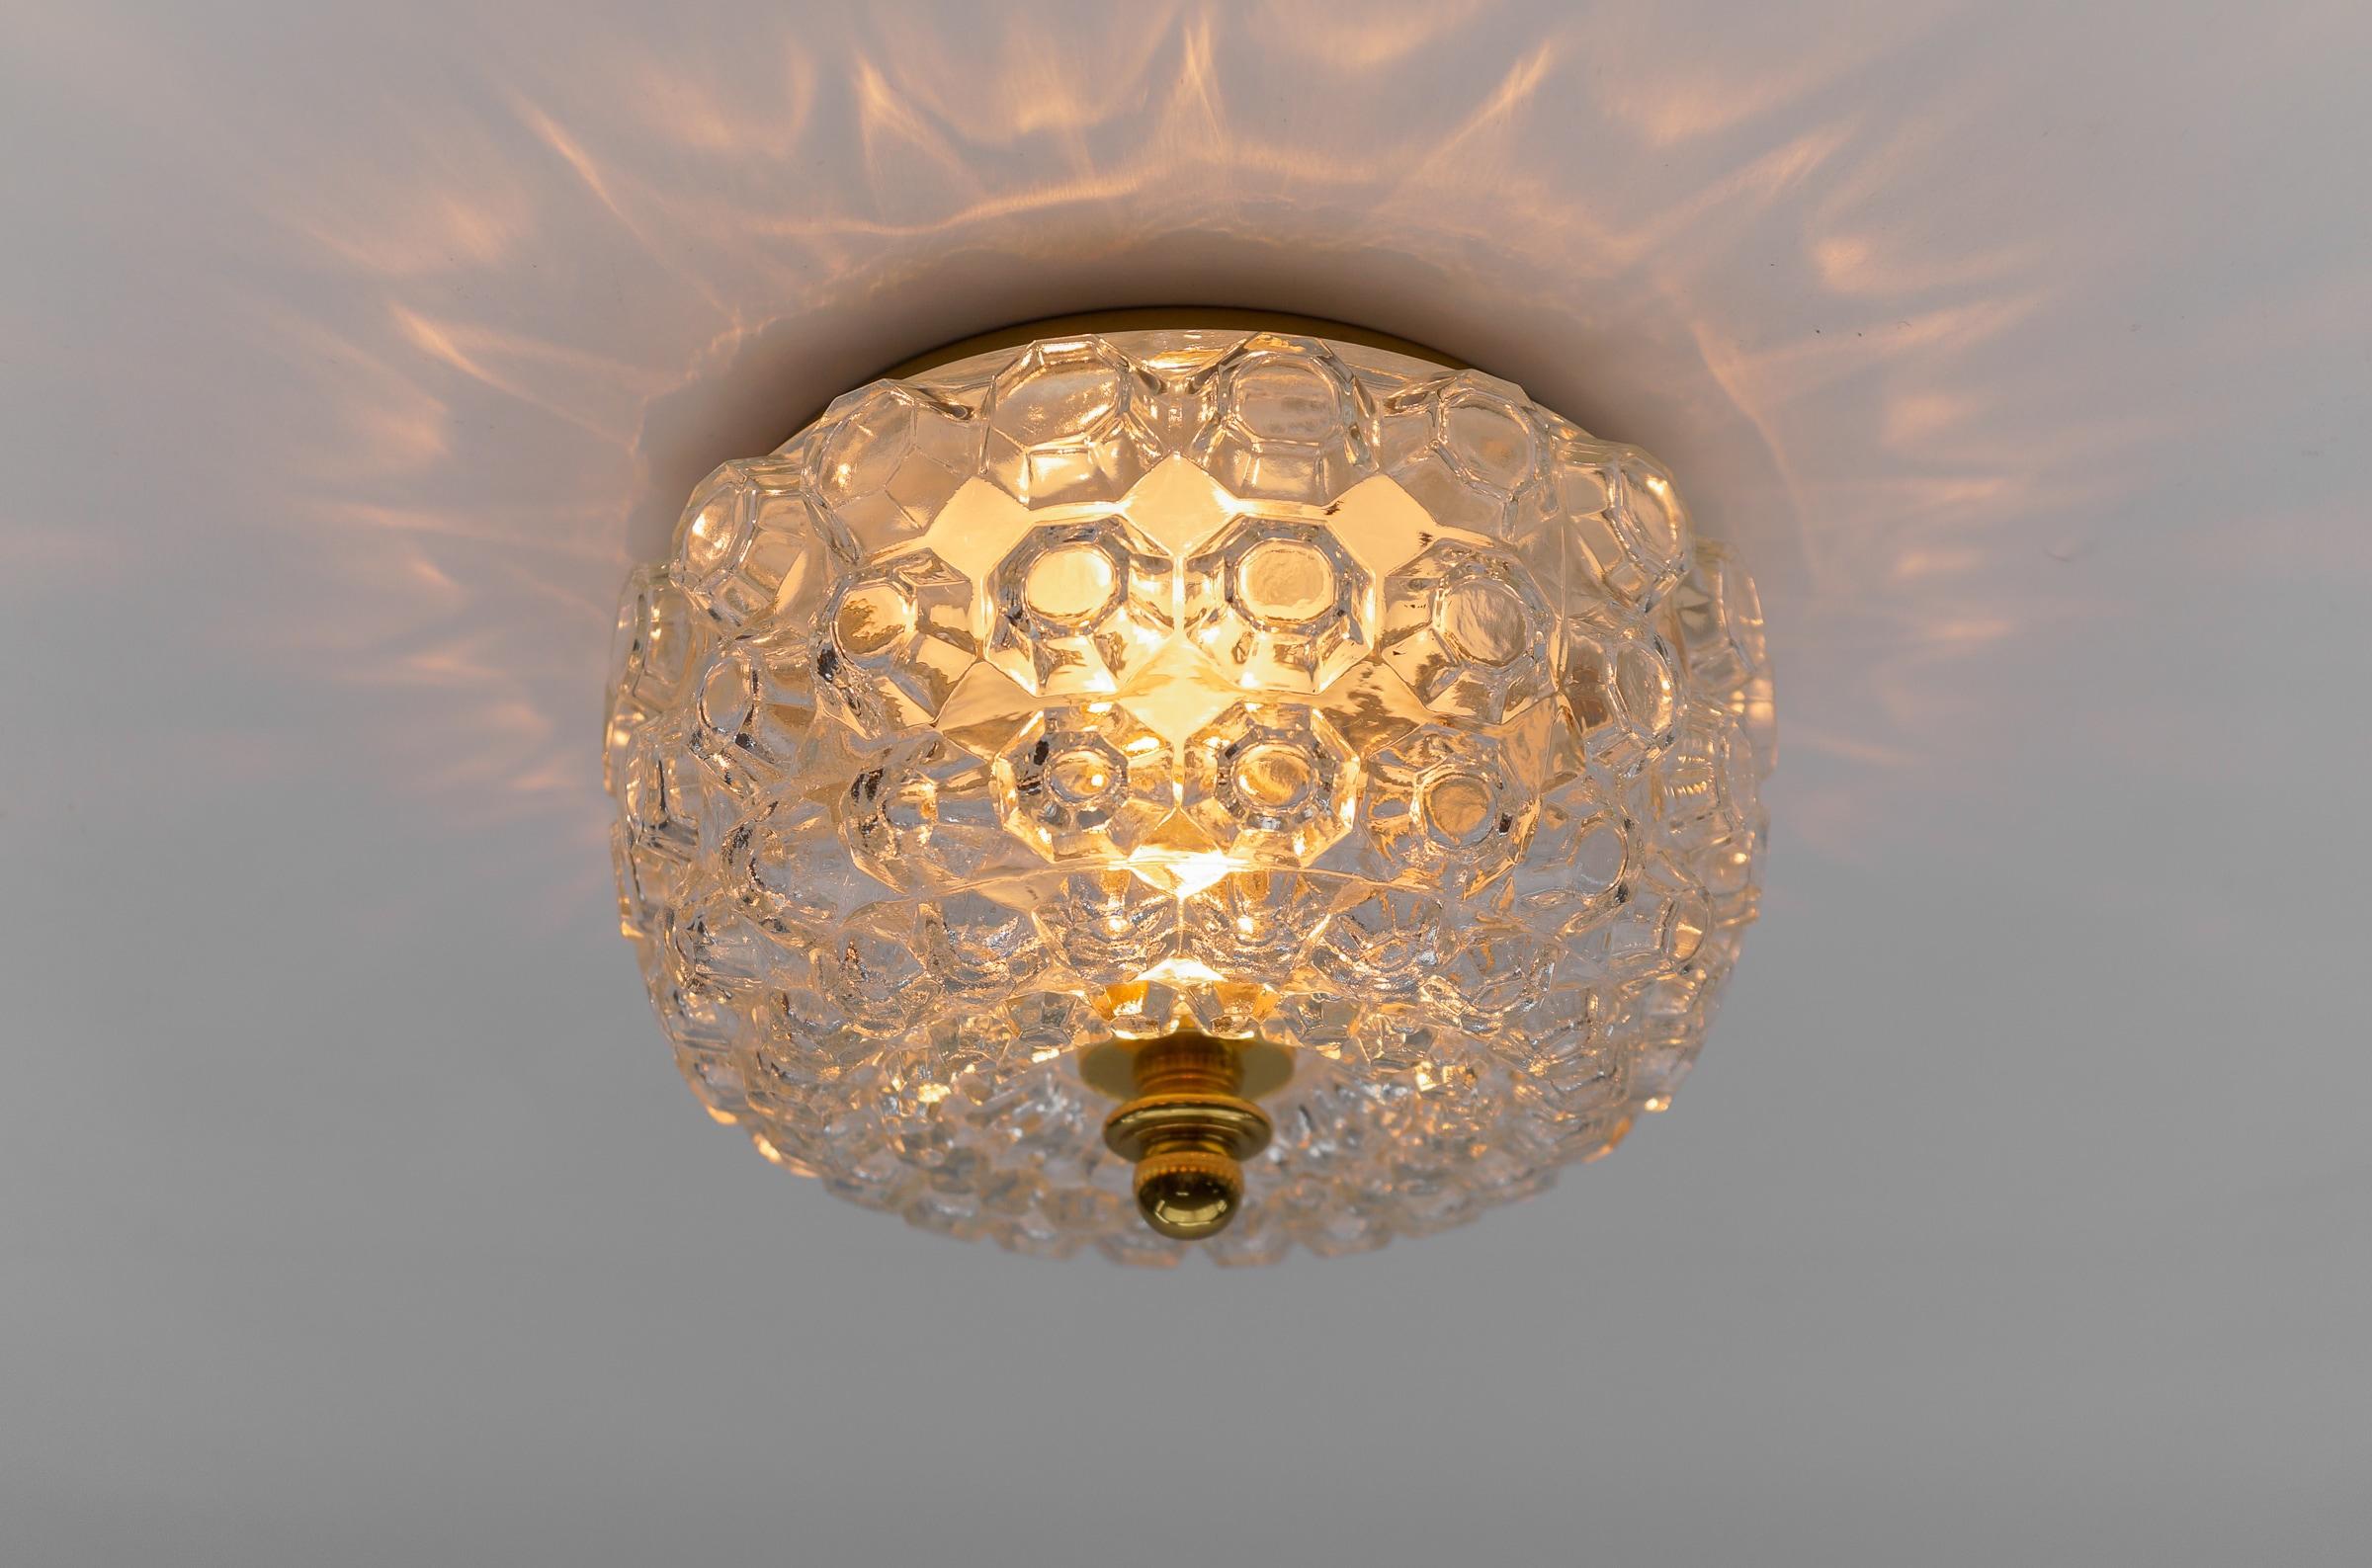 1 of 4 Petite Elegant Flush Mount Lamp in Glass by Limburg, Gerrmany 1960s

We have four different sizes of the same model with 4 pieces per size which can also be found here on the platform.

The fixture need 1 x E27 standard bulb.

Light bulbs are